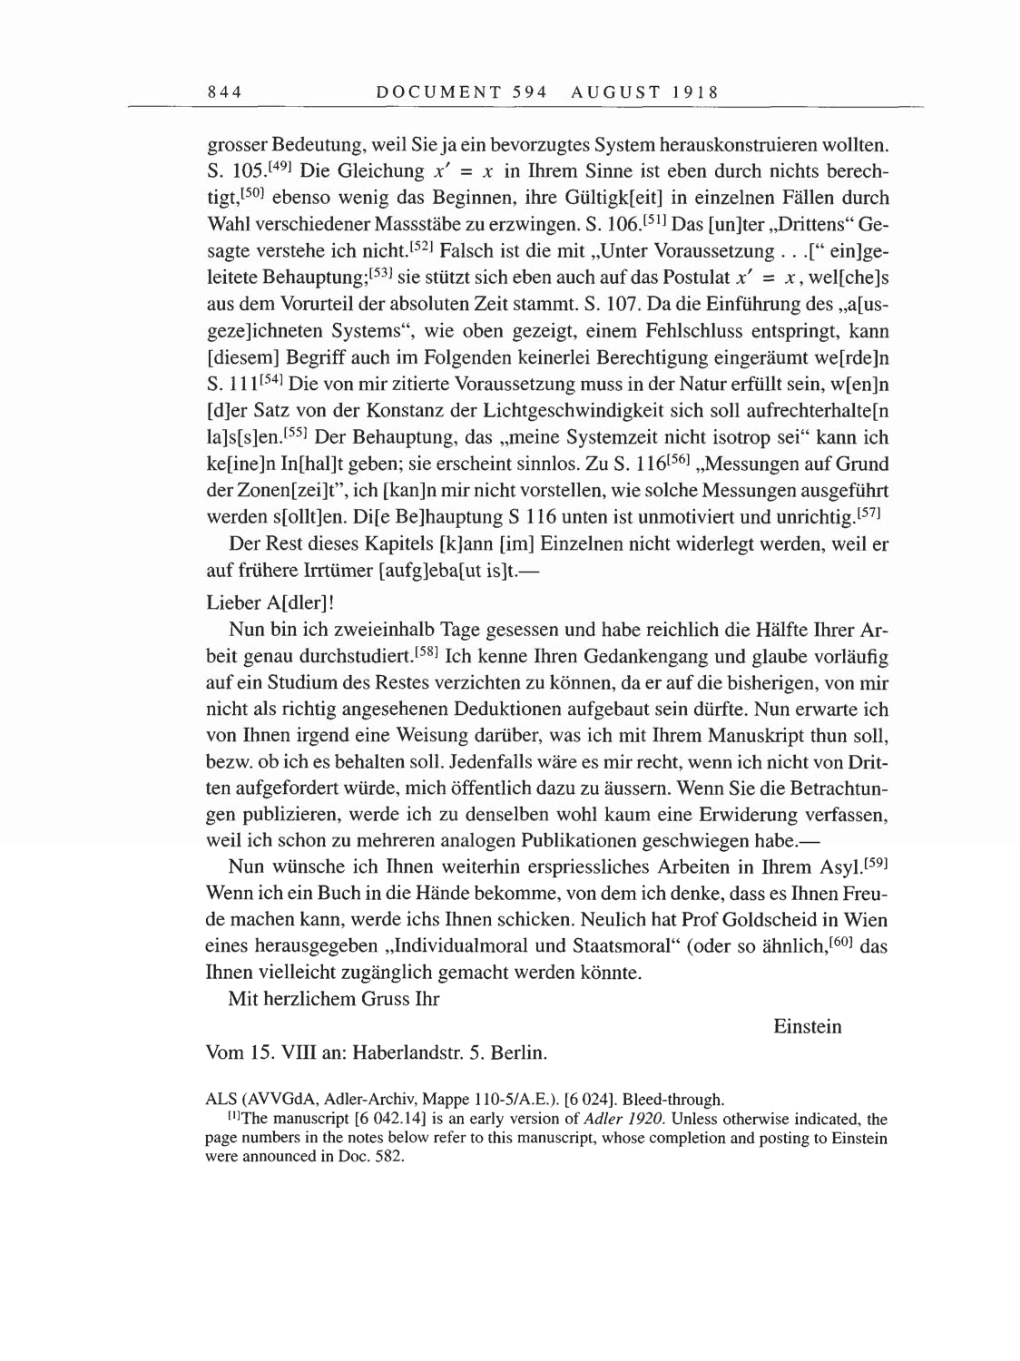 Volume 8, Part B: The Berlin Years: Correspondence 1918 page 844